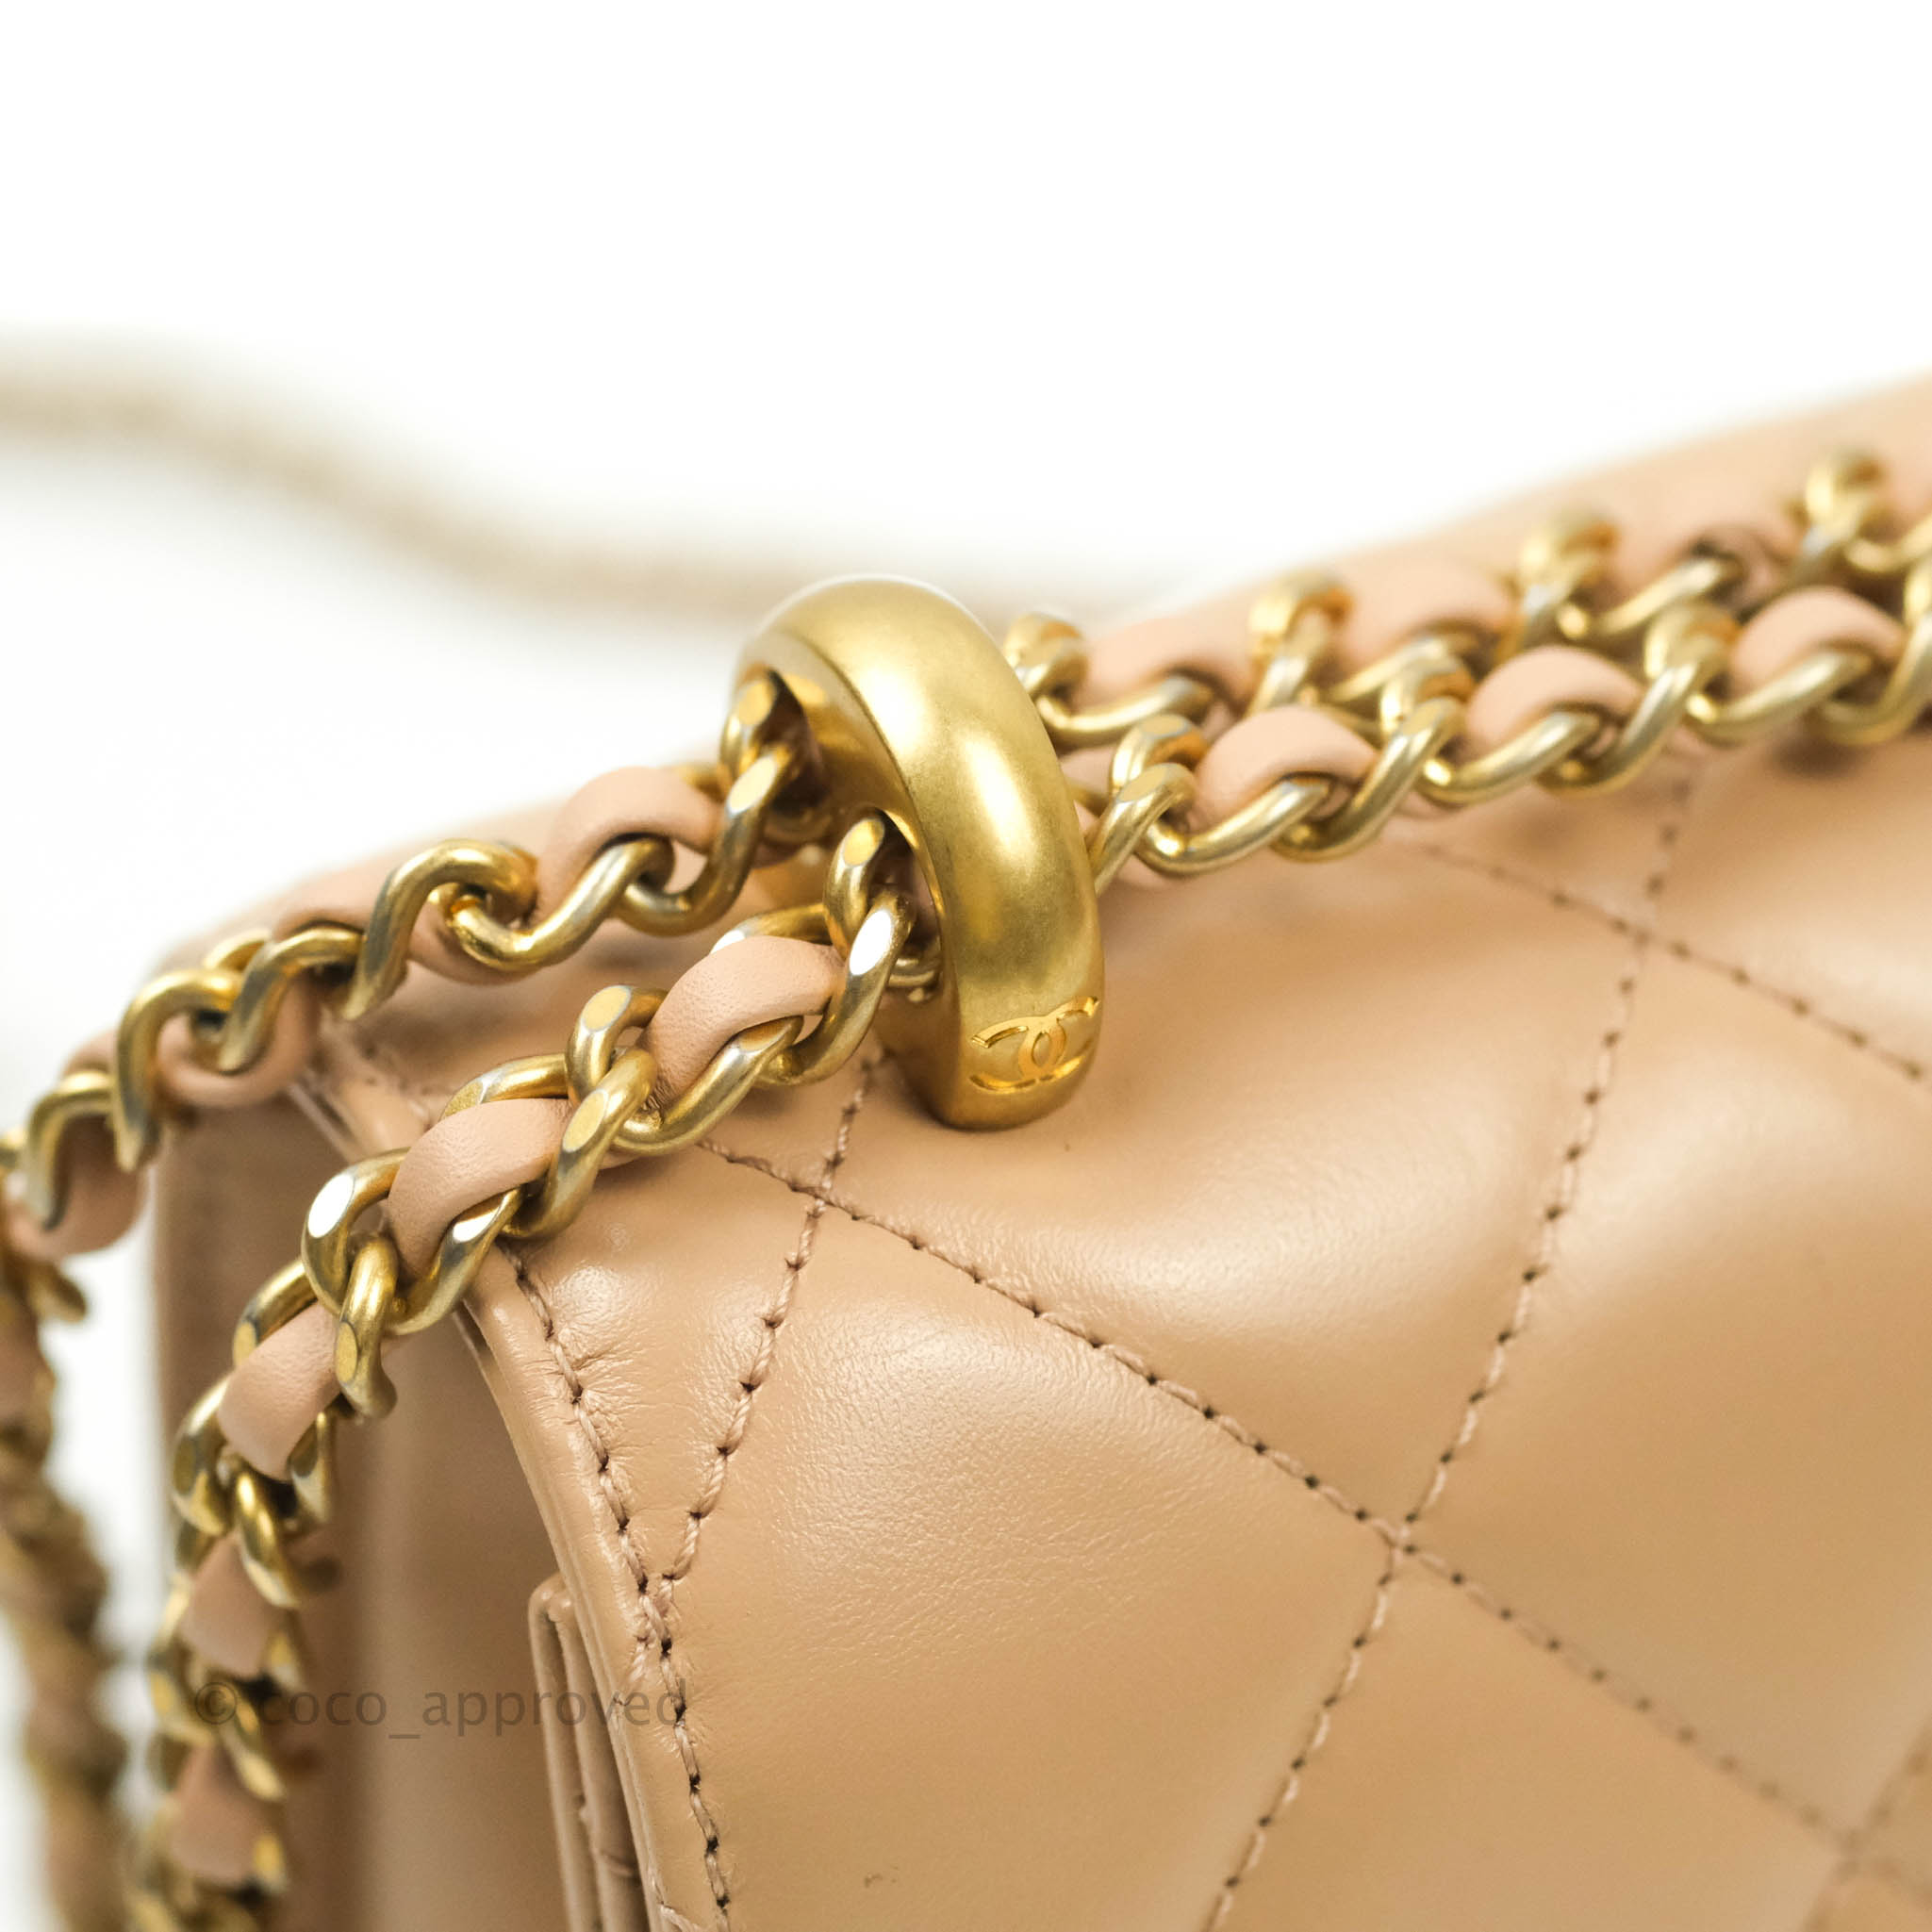 Chanel Quilted Mini Perfect Fit Adjustable Beige Calfskin Gold